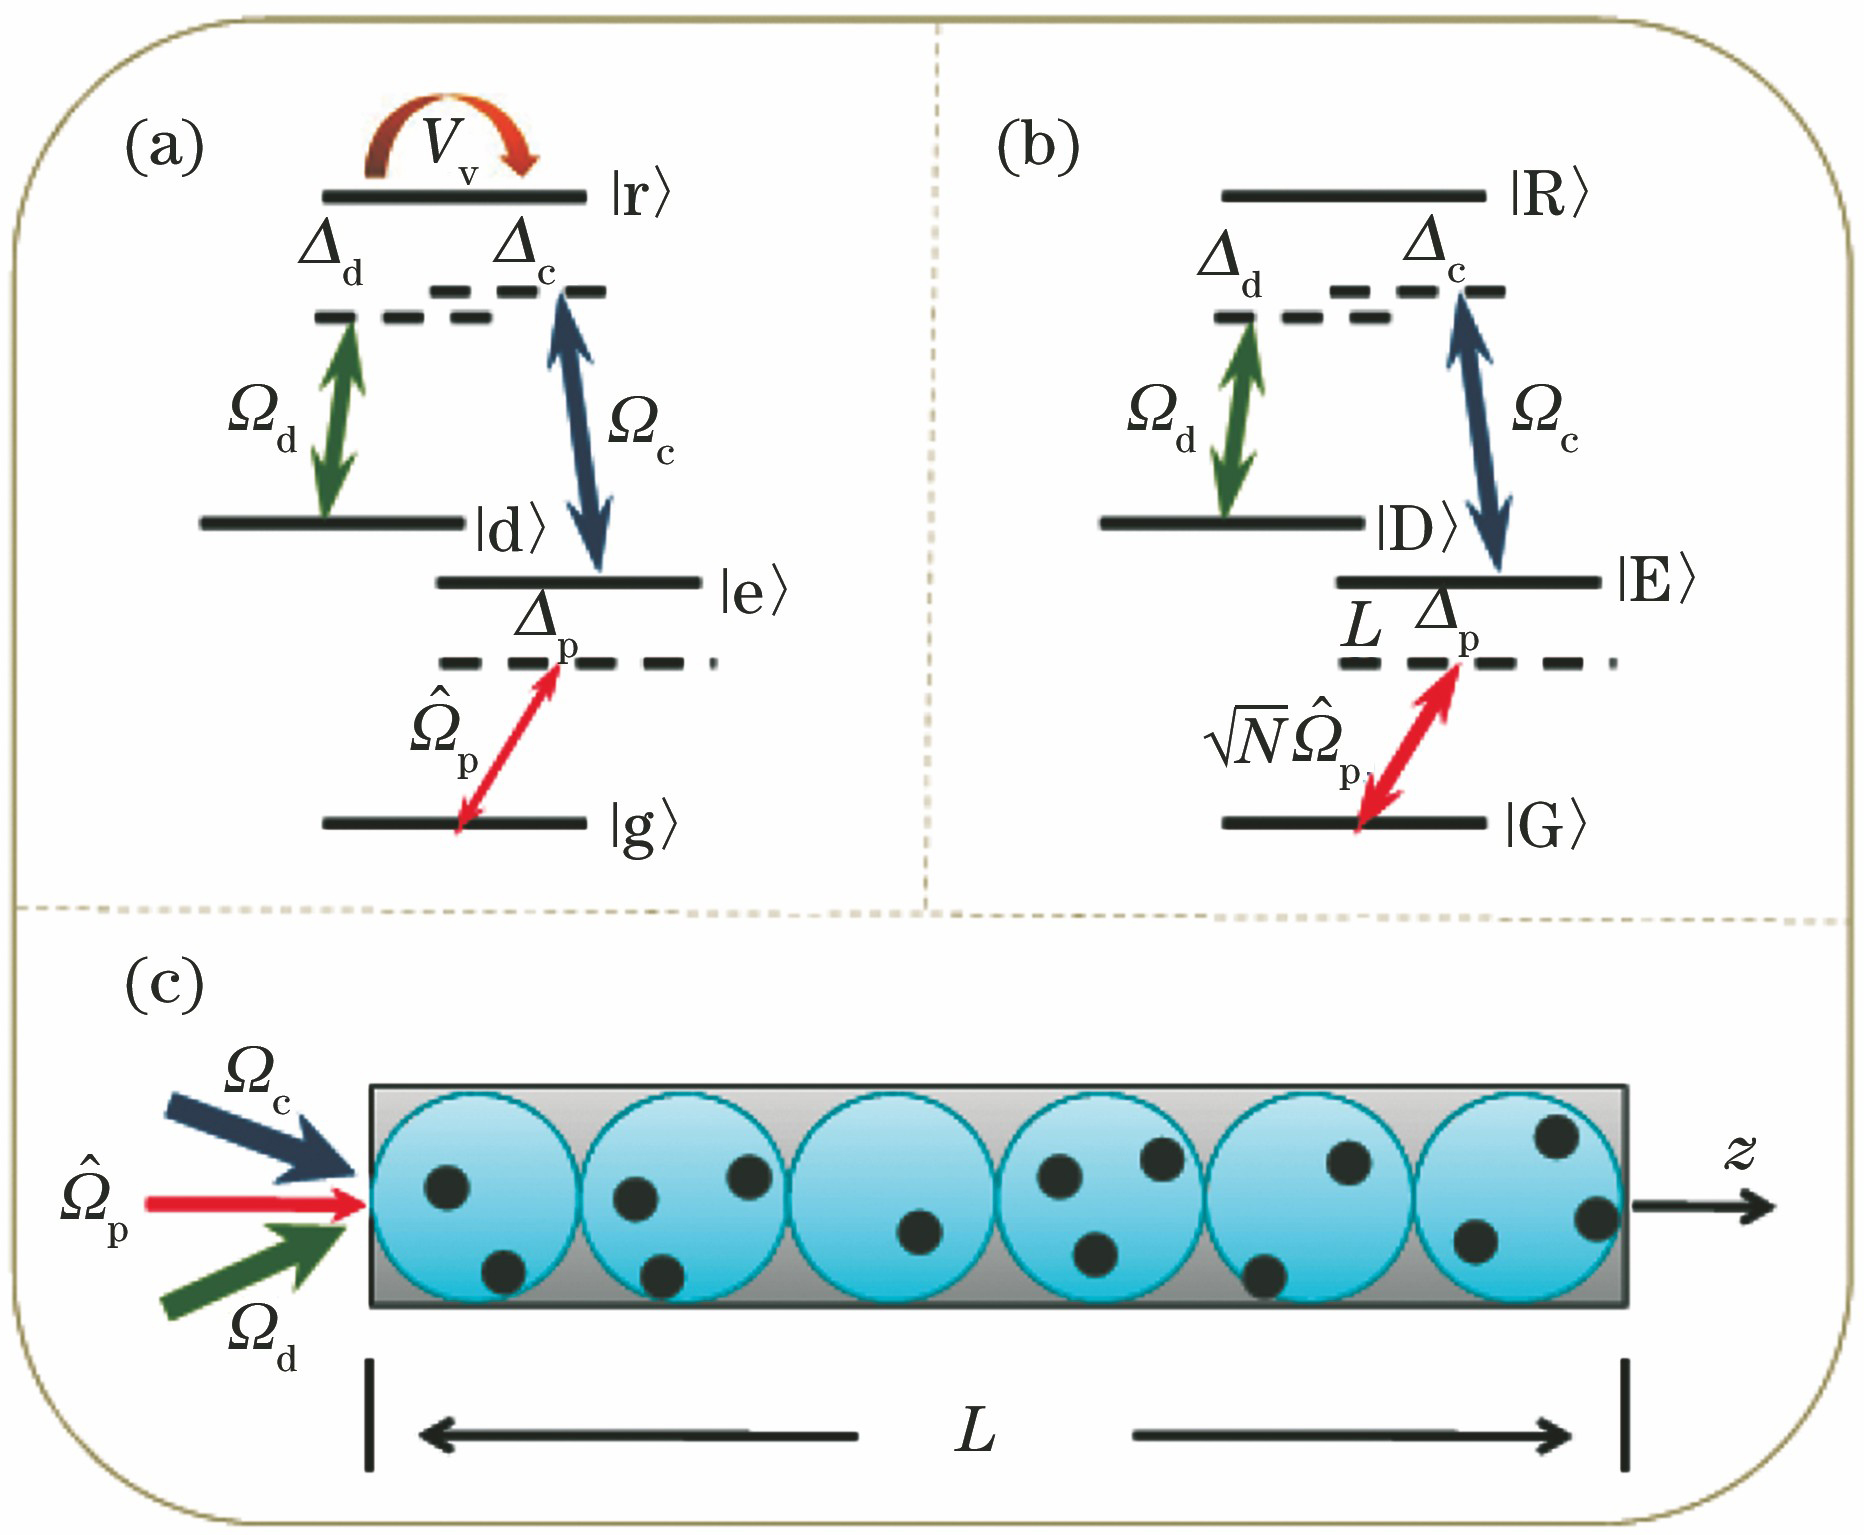 Atomic structure diagrams. (a) Energy level structure of interacting four-level cold atoms; (b) equivalent energy level structure of super atom; (c) one-dimensional ultra-cold atomic ensemble